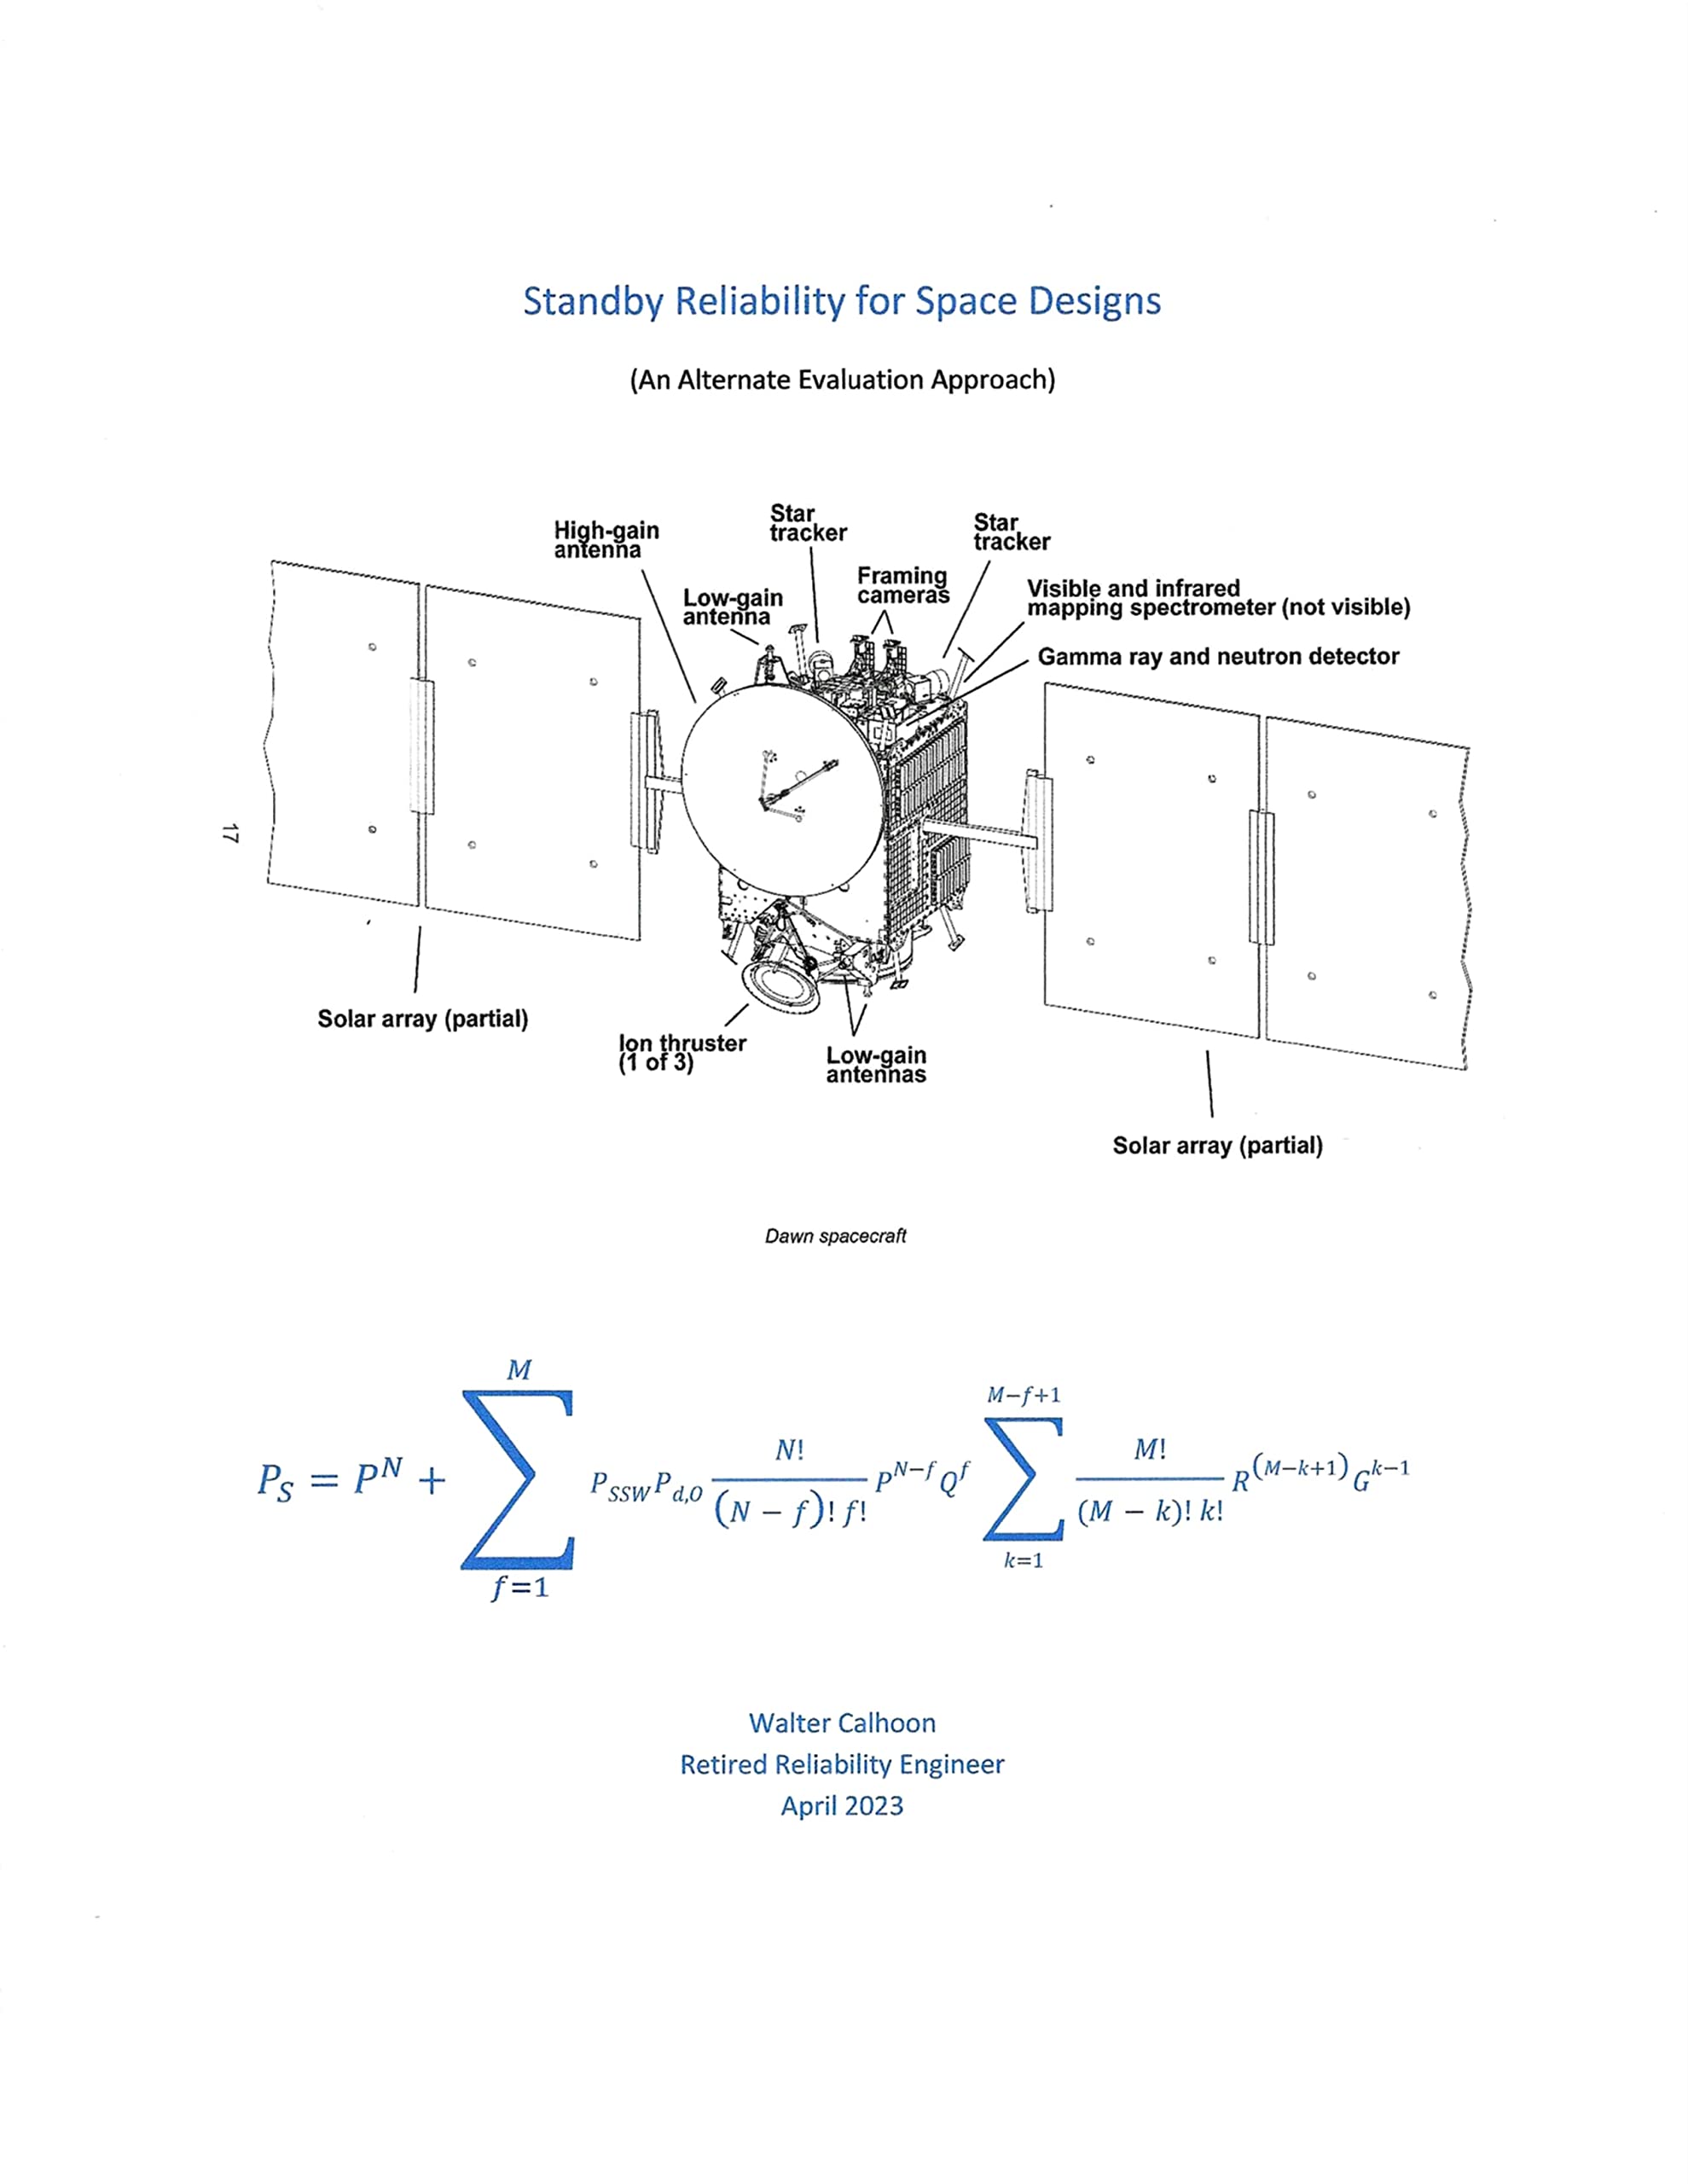 Standby Reliability for Space Designs: (An Alternate Evaluation Approach)